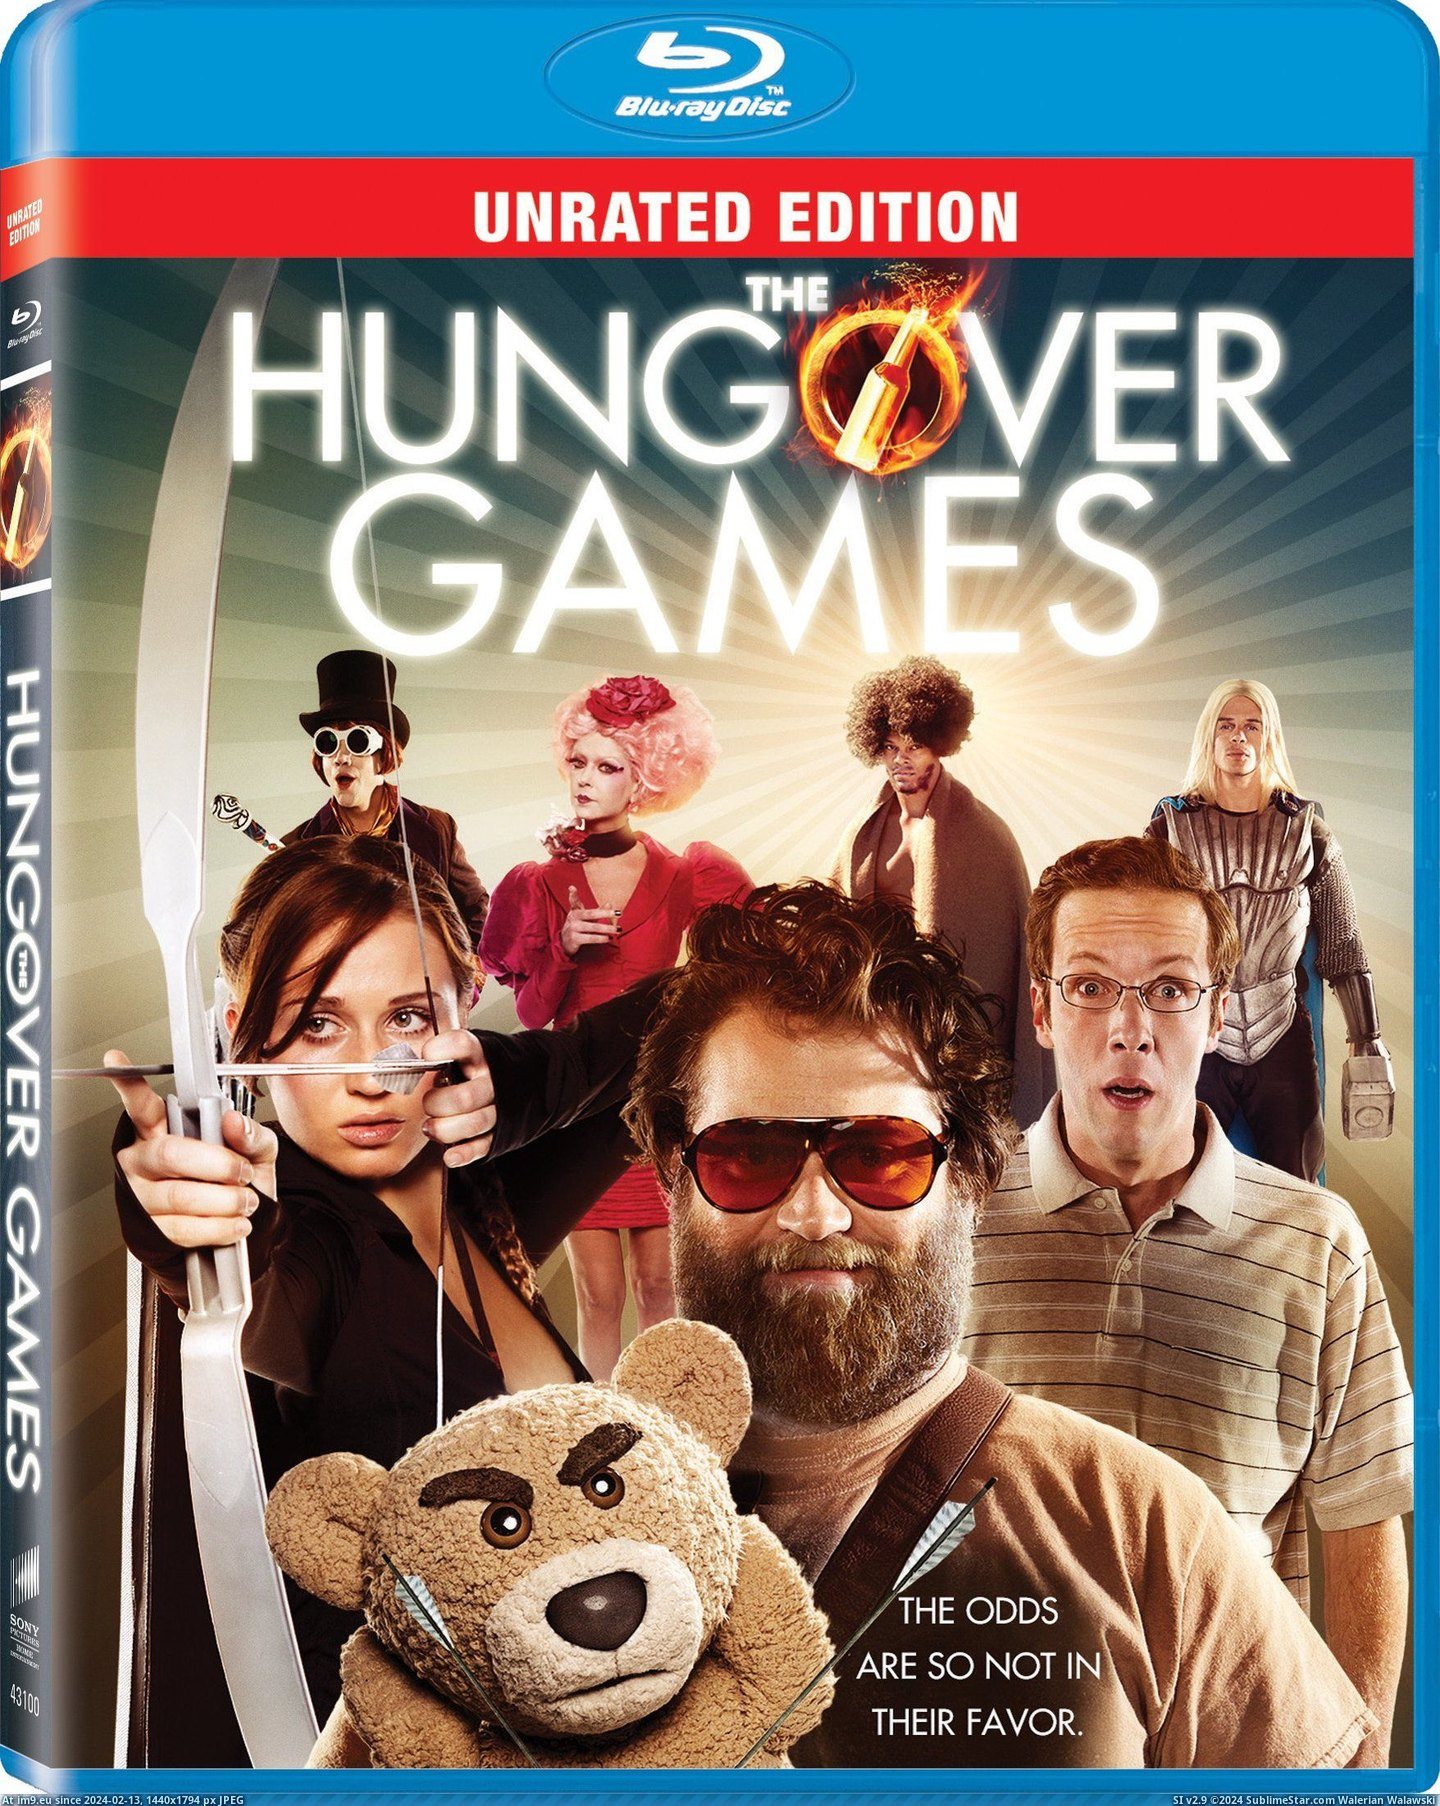 the-hungover-games-blu-ray-cover-03 (in Aaaa 2)